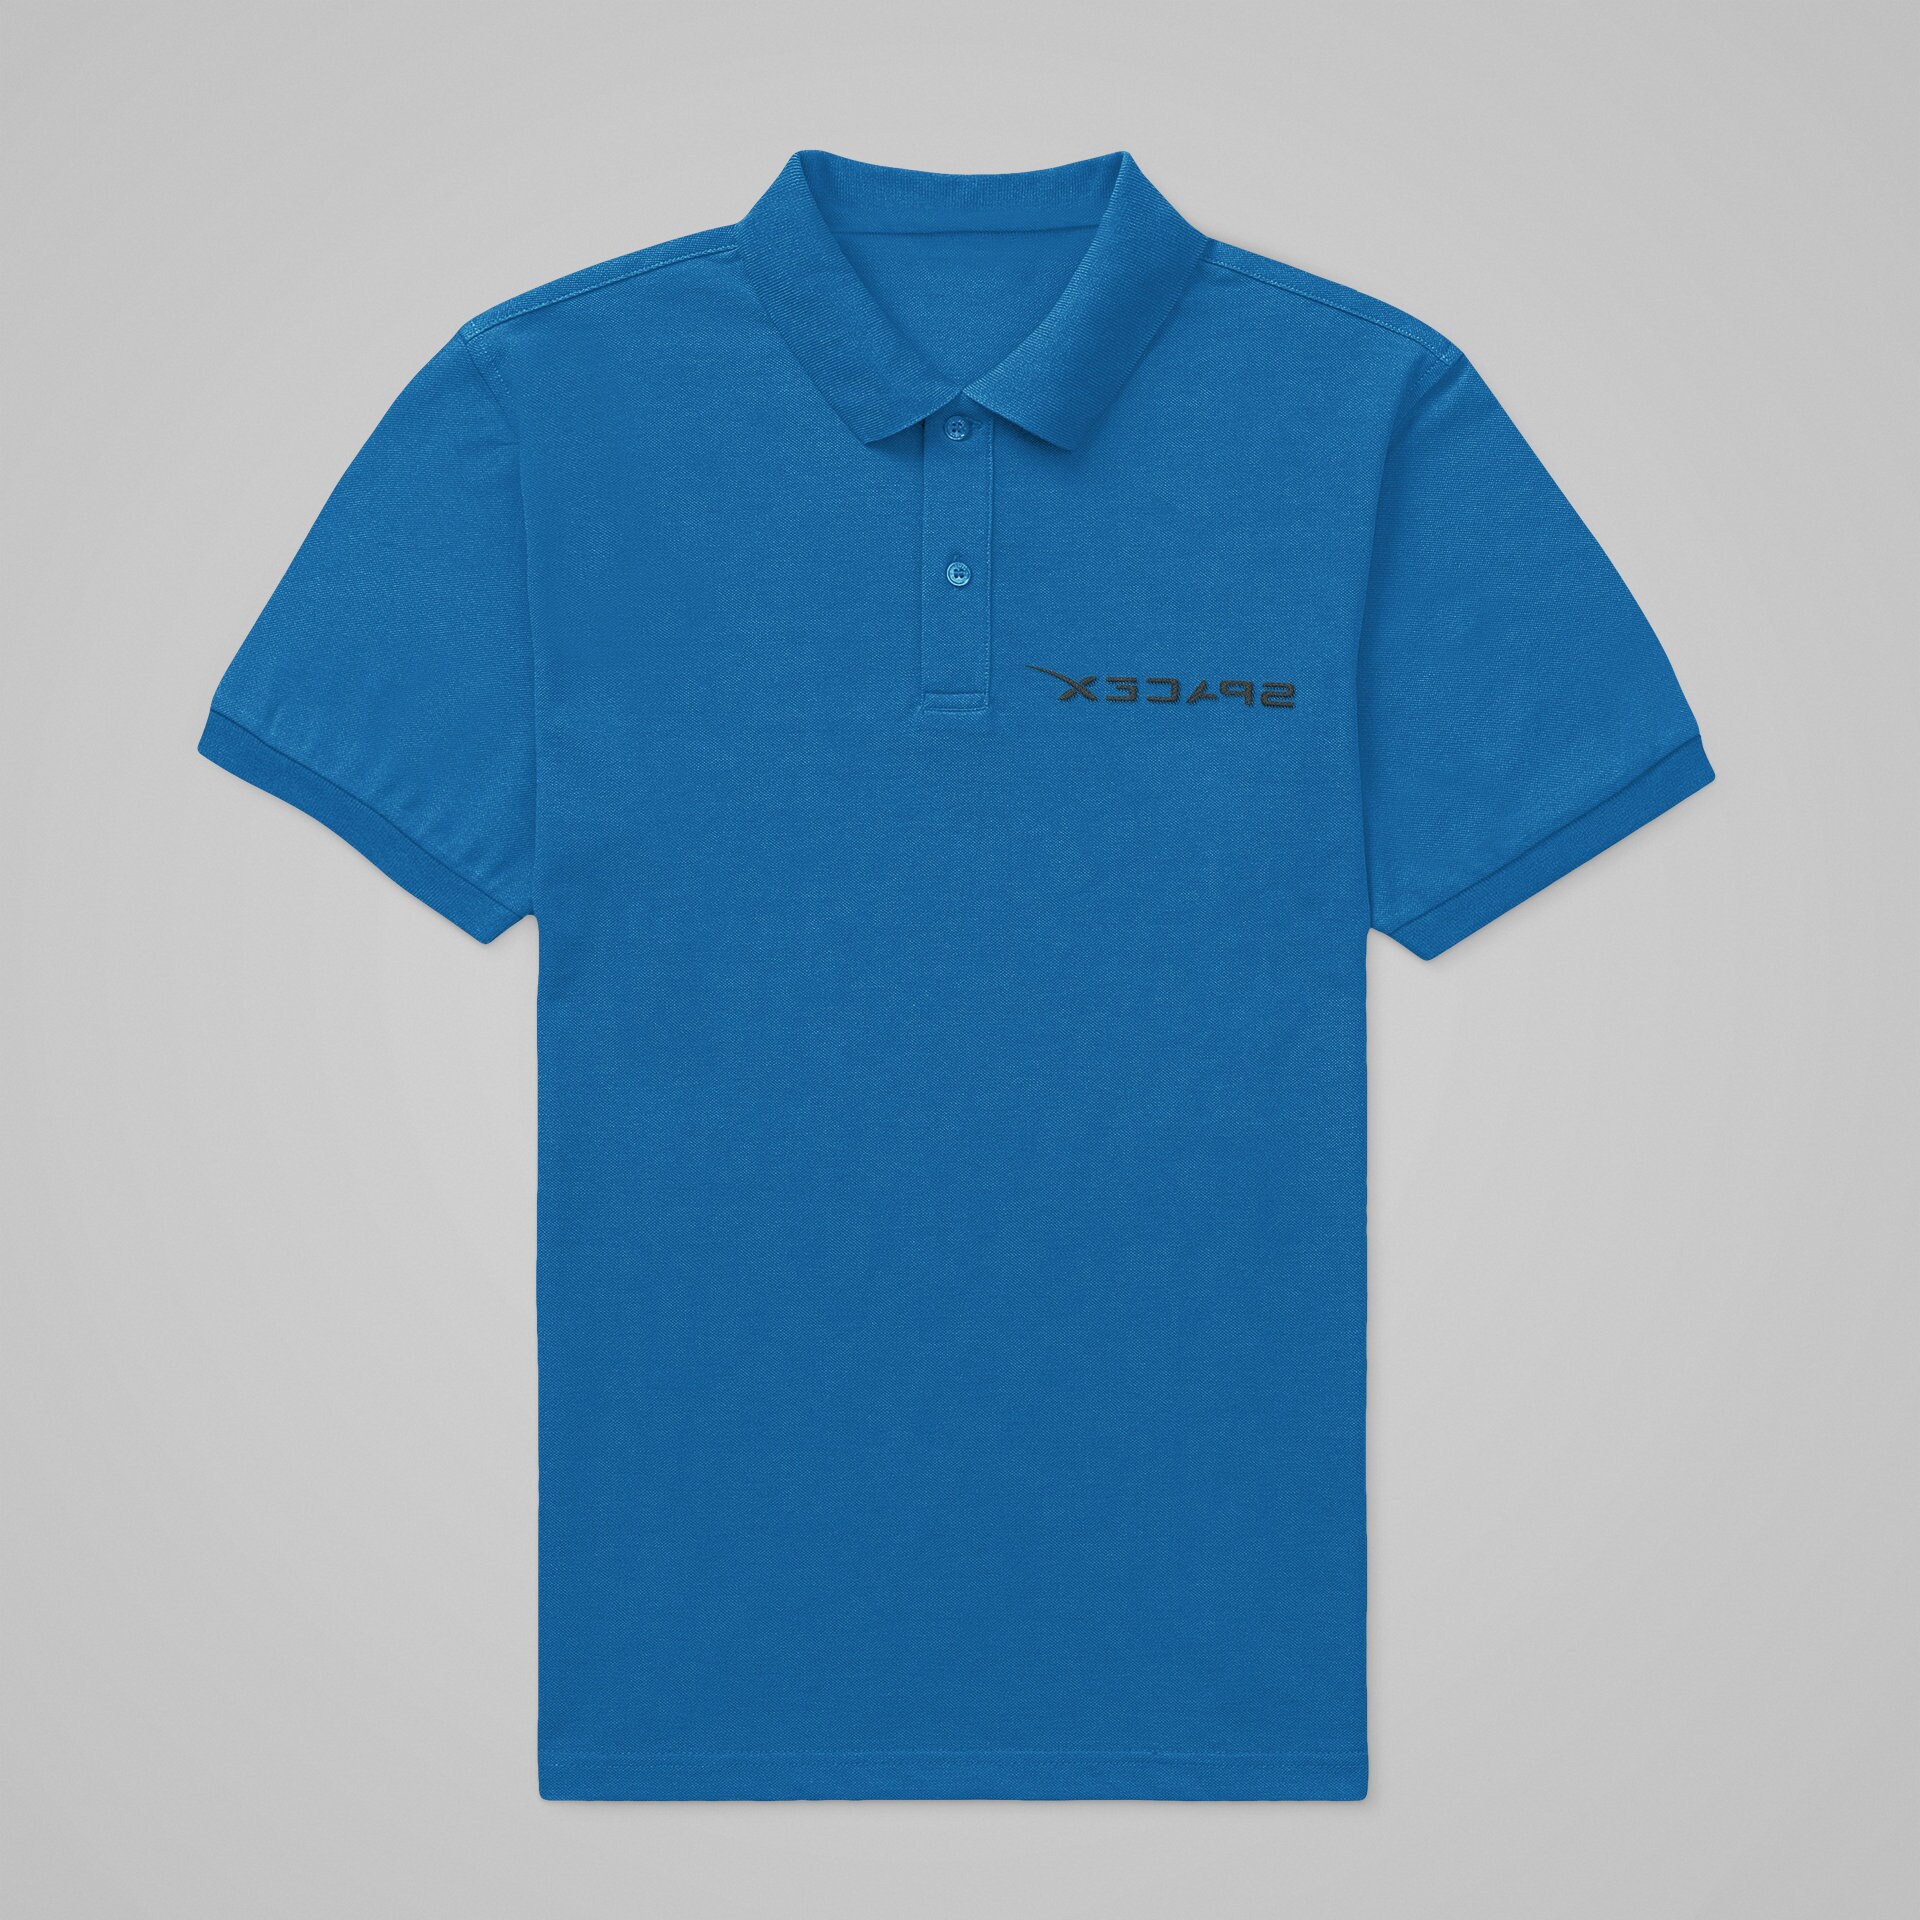 Discover Spacex Space Technologies Elon Musk Embroidered Polo Shirt